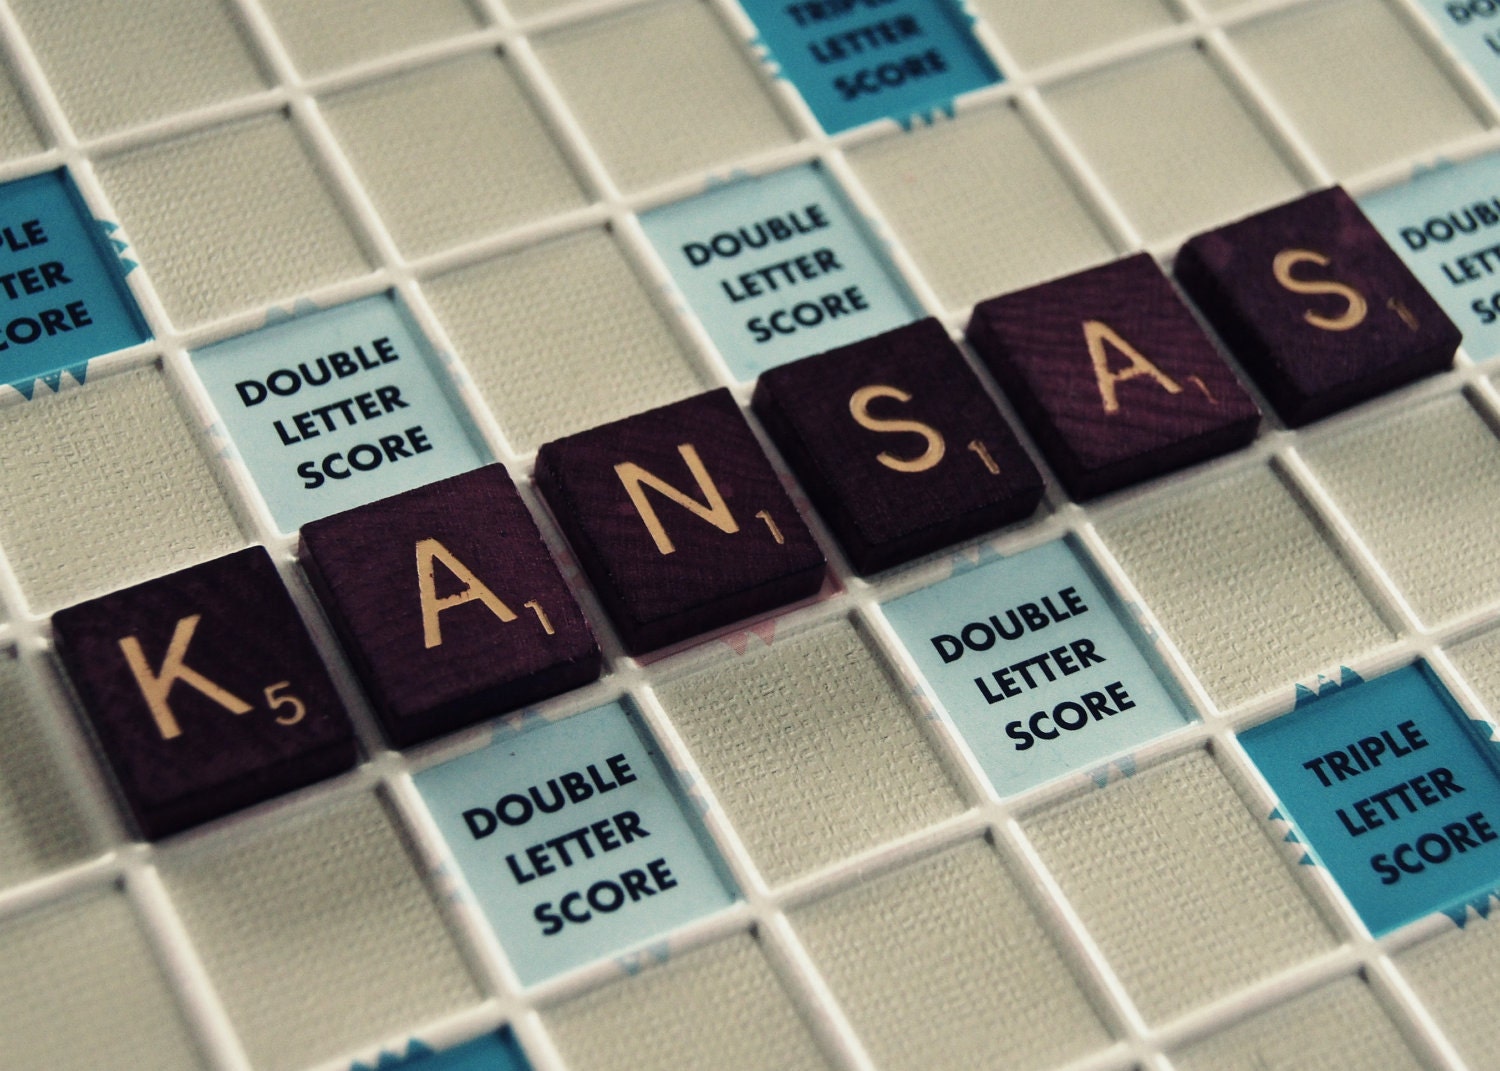 Kansas - Scrabble Collection - Fine Art Photography - In Stock - 5x7